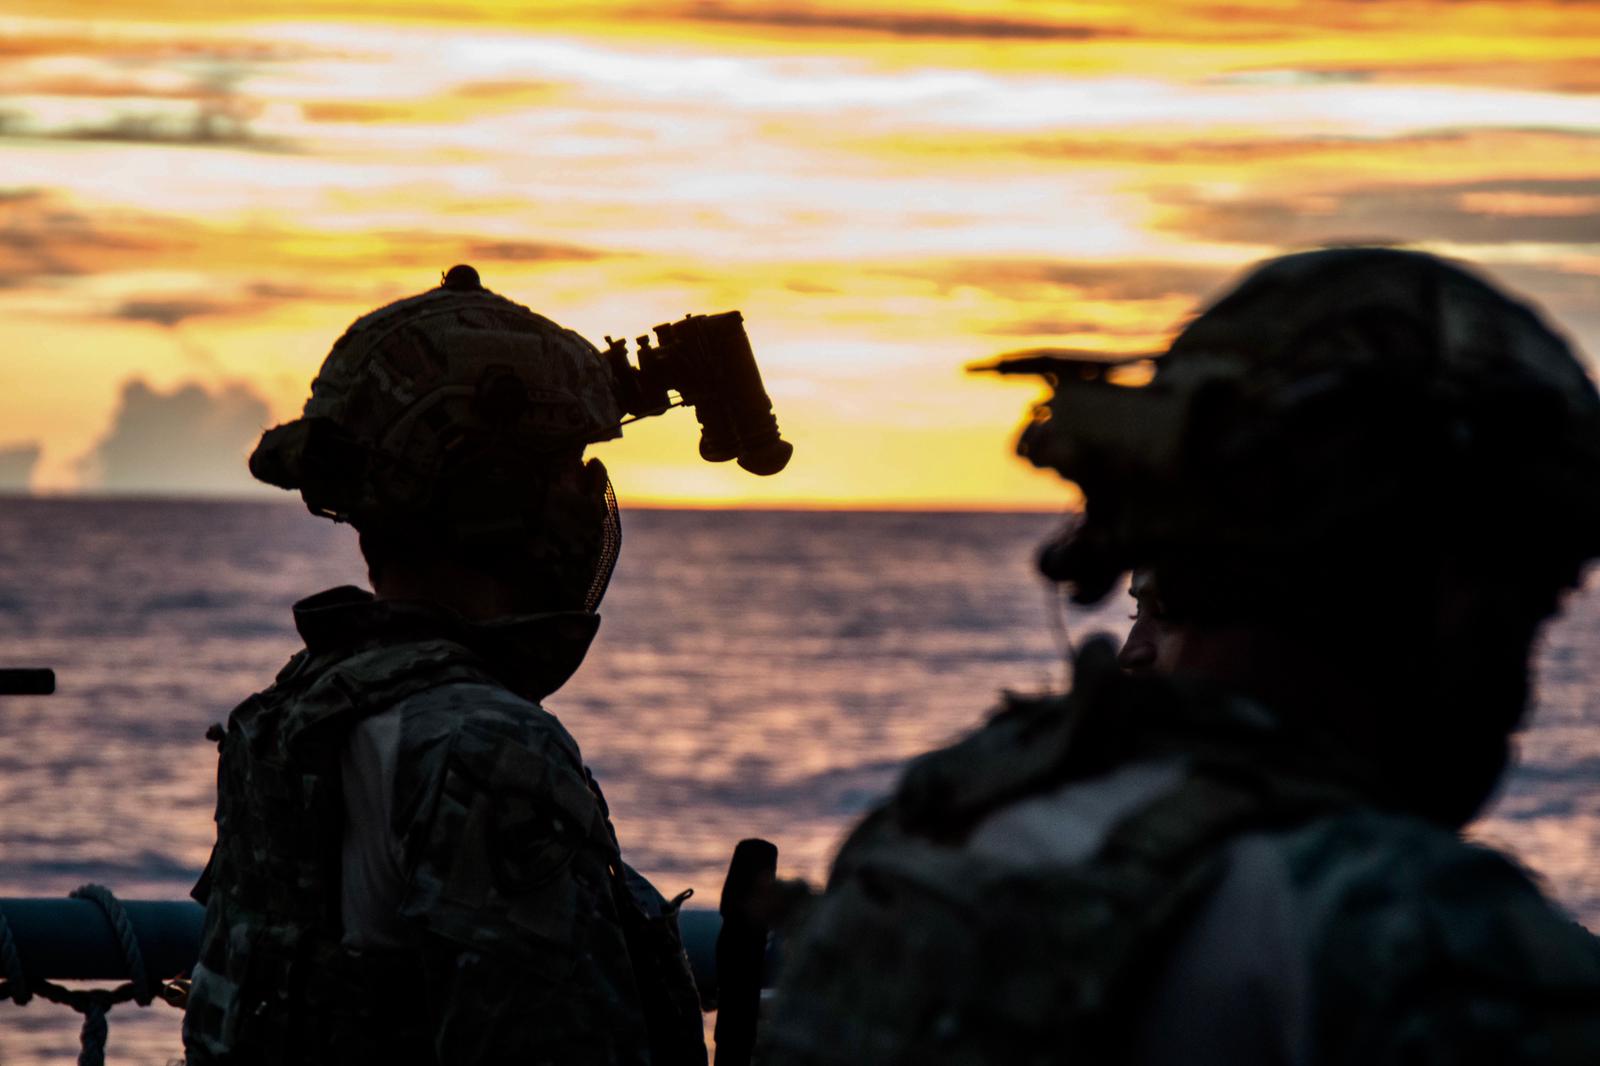 The Special Naval Warfare Force Team of Marine Infantry contributes to security in the Somali coasts